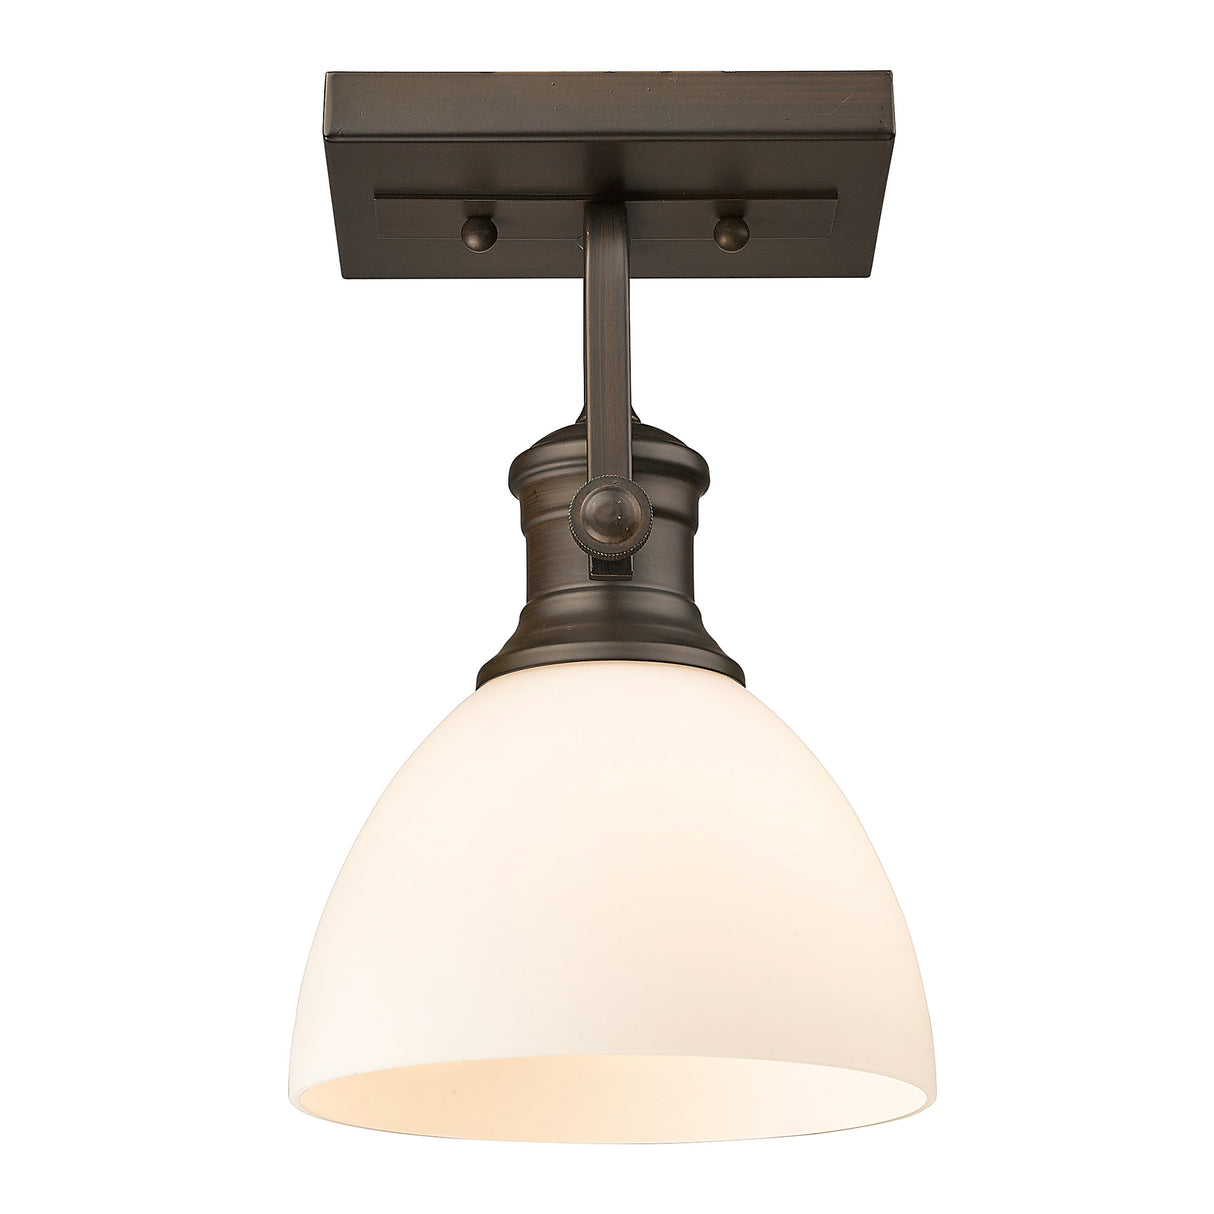 Hines 1-Light Semi-Flush in Rubbed Bronze with Opal Glass